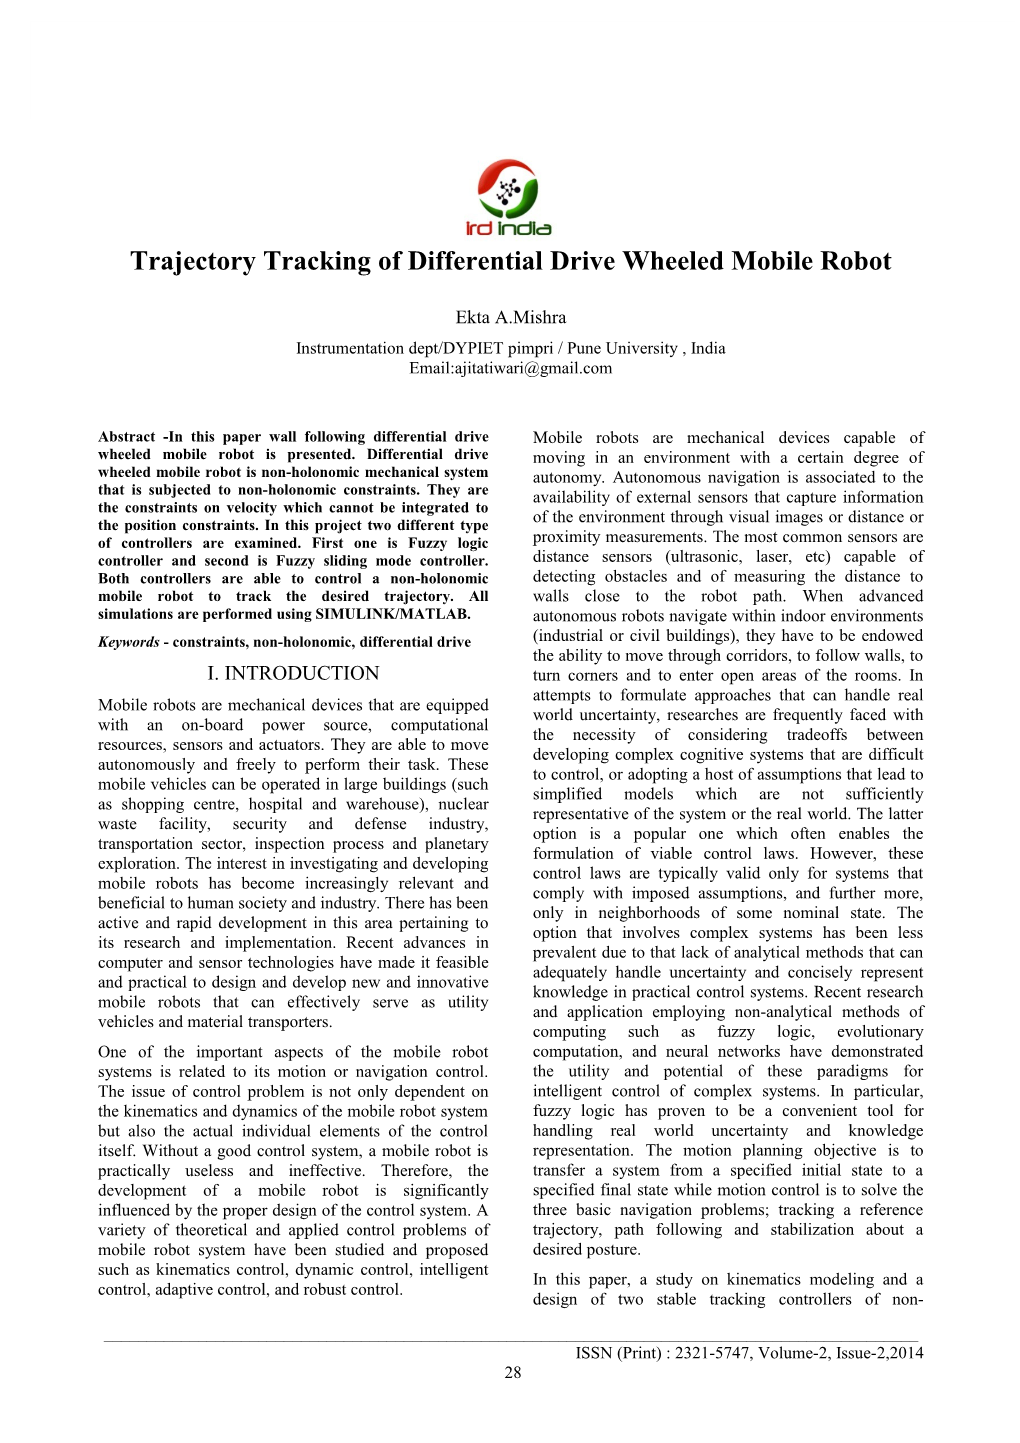 Trajectory Tracking of Differential Drive Wheeled Mobile Robot